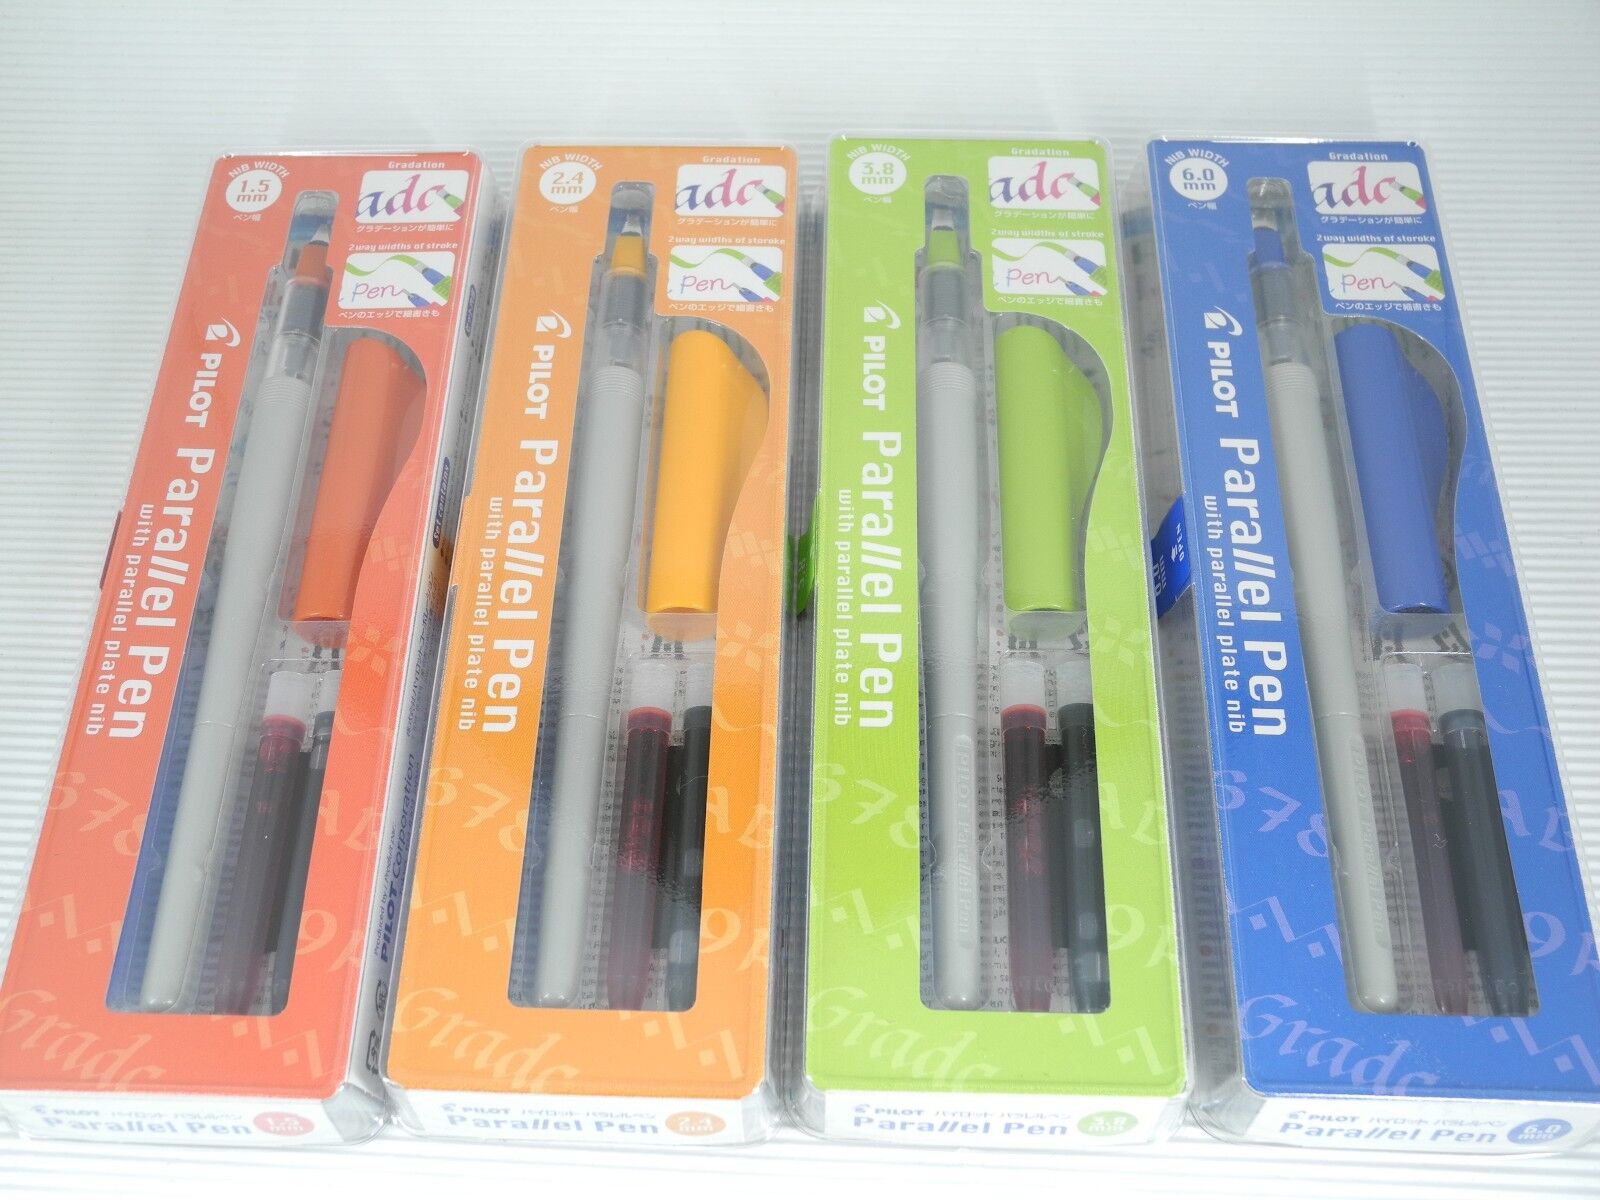 4 Size Set Pilot Parallel Calligraphy pen 1.5mm 2.4mm 3.8m 6.0mm (Made in Japan)